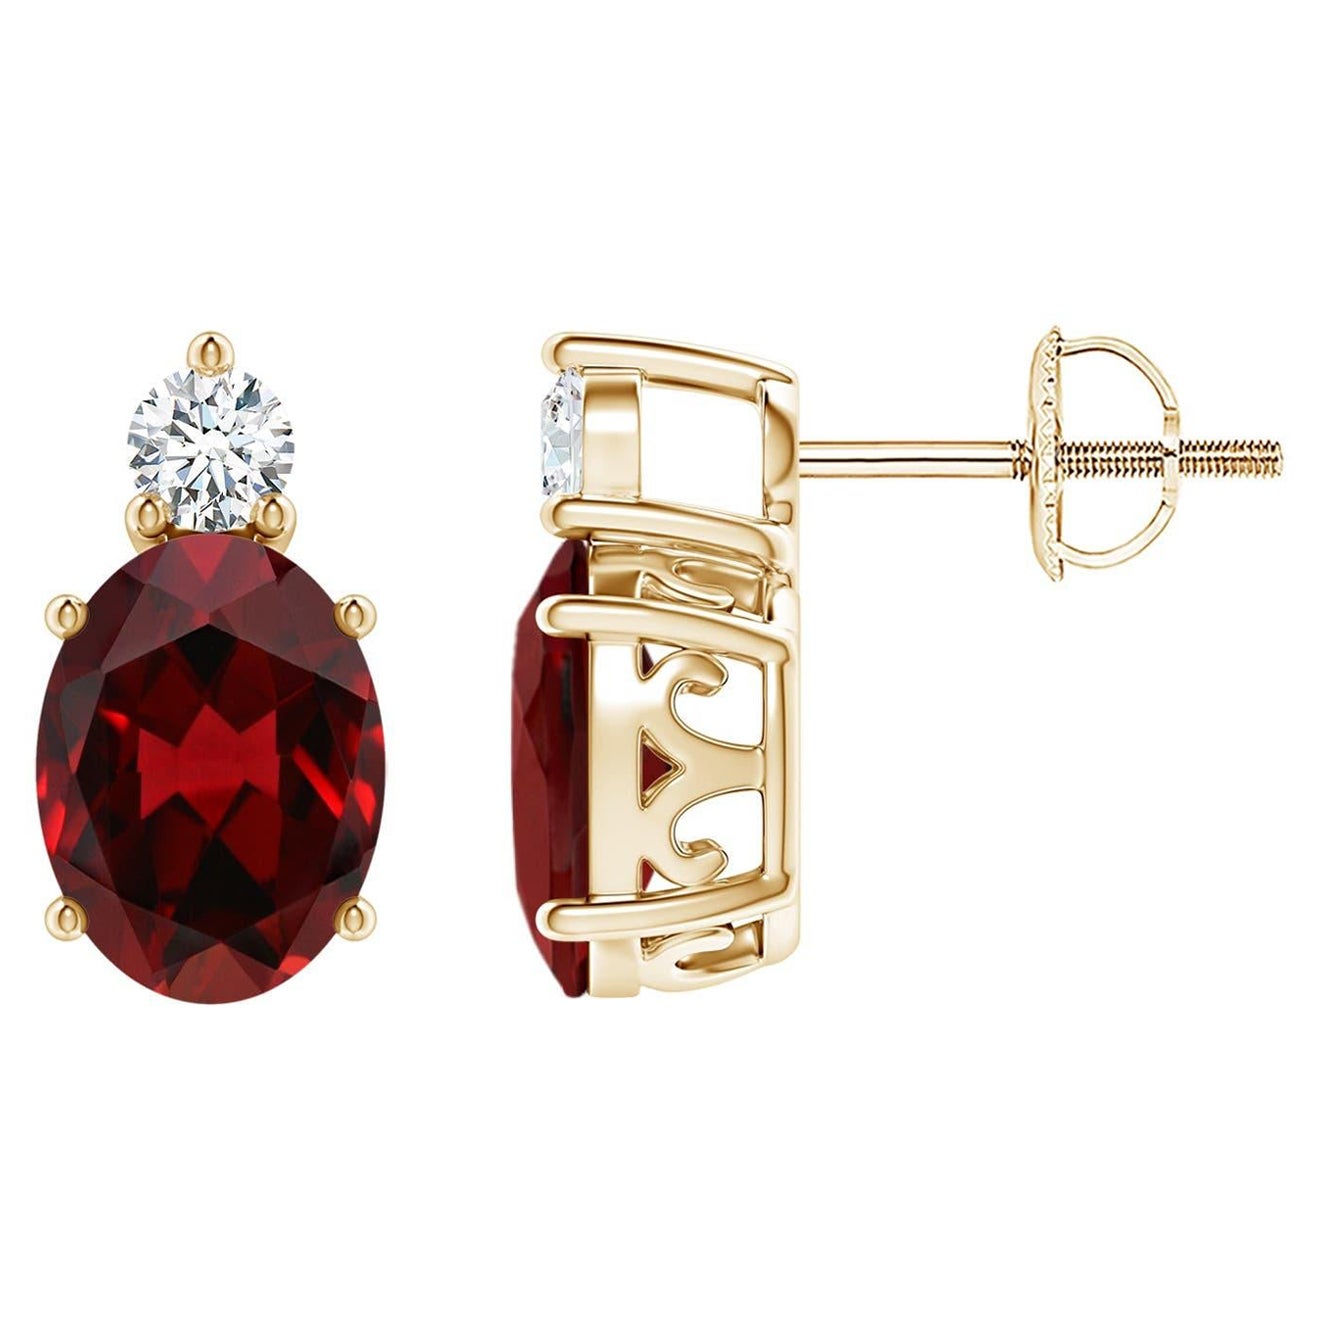 Natural Oval 2.9ct Garnet Stud Earrings with Diamond in 14K Yellow Gold